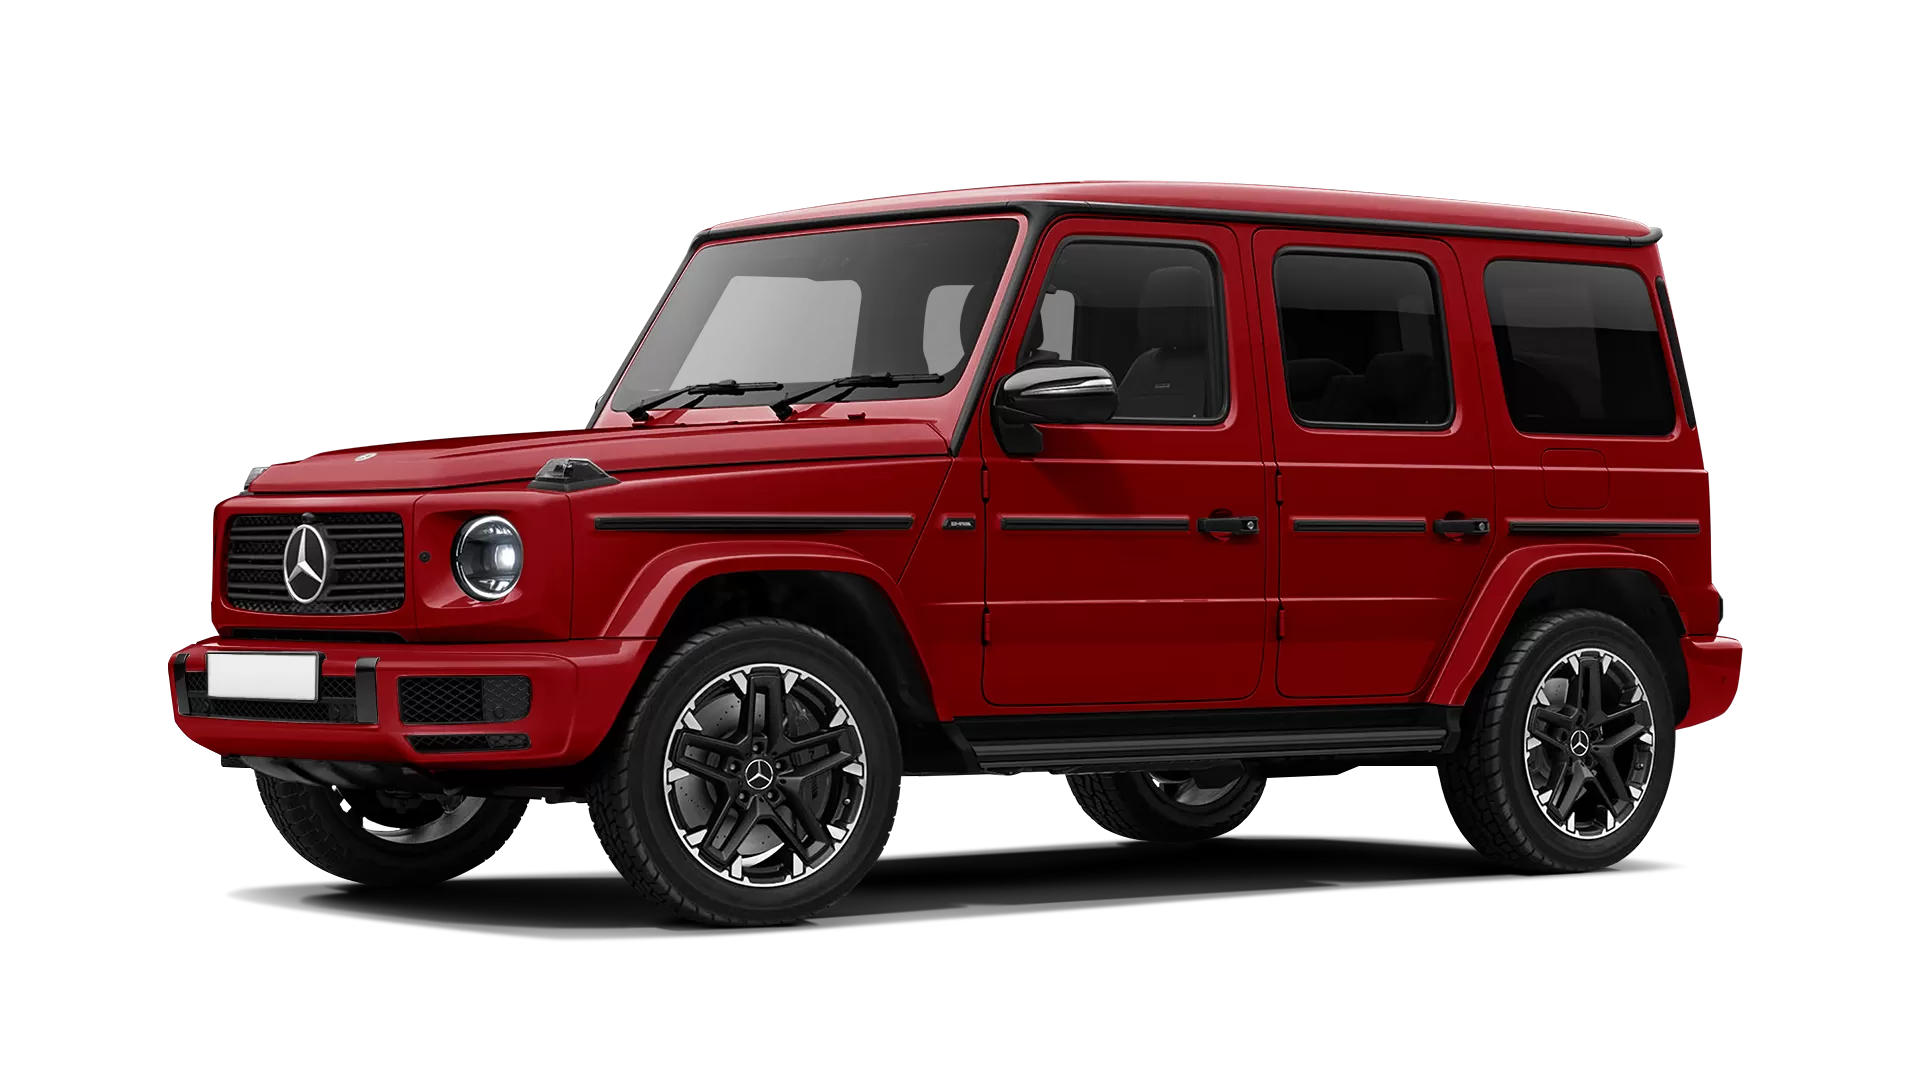 Mercedes G class W463 stock front view in Jupiter Red color